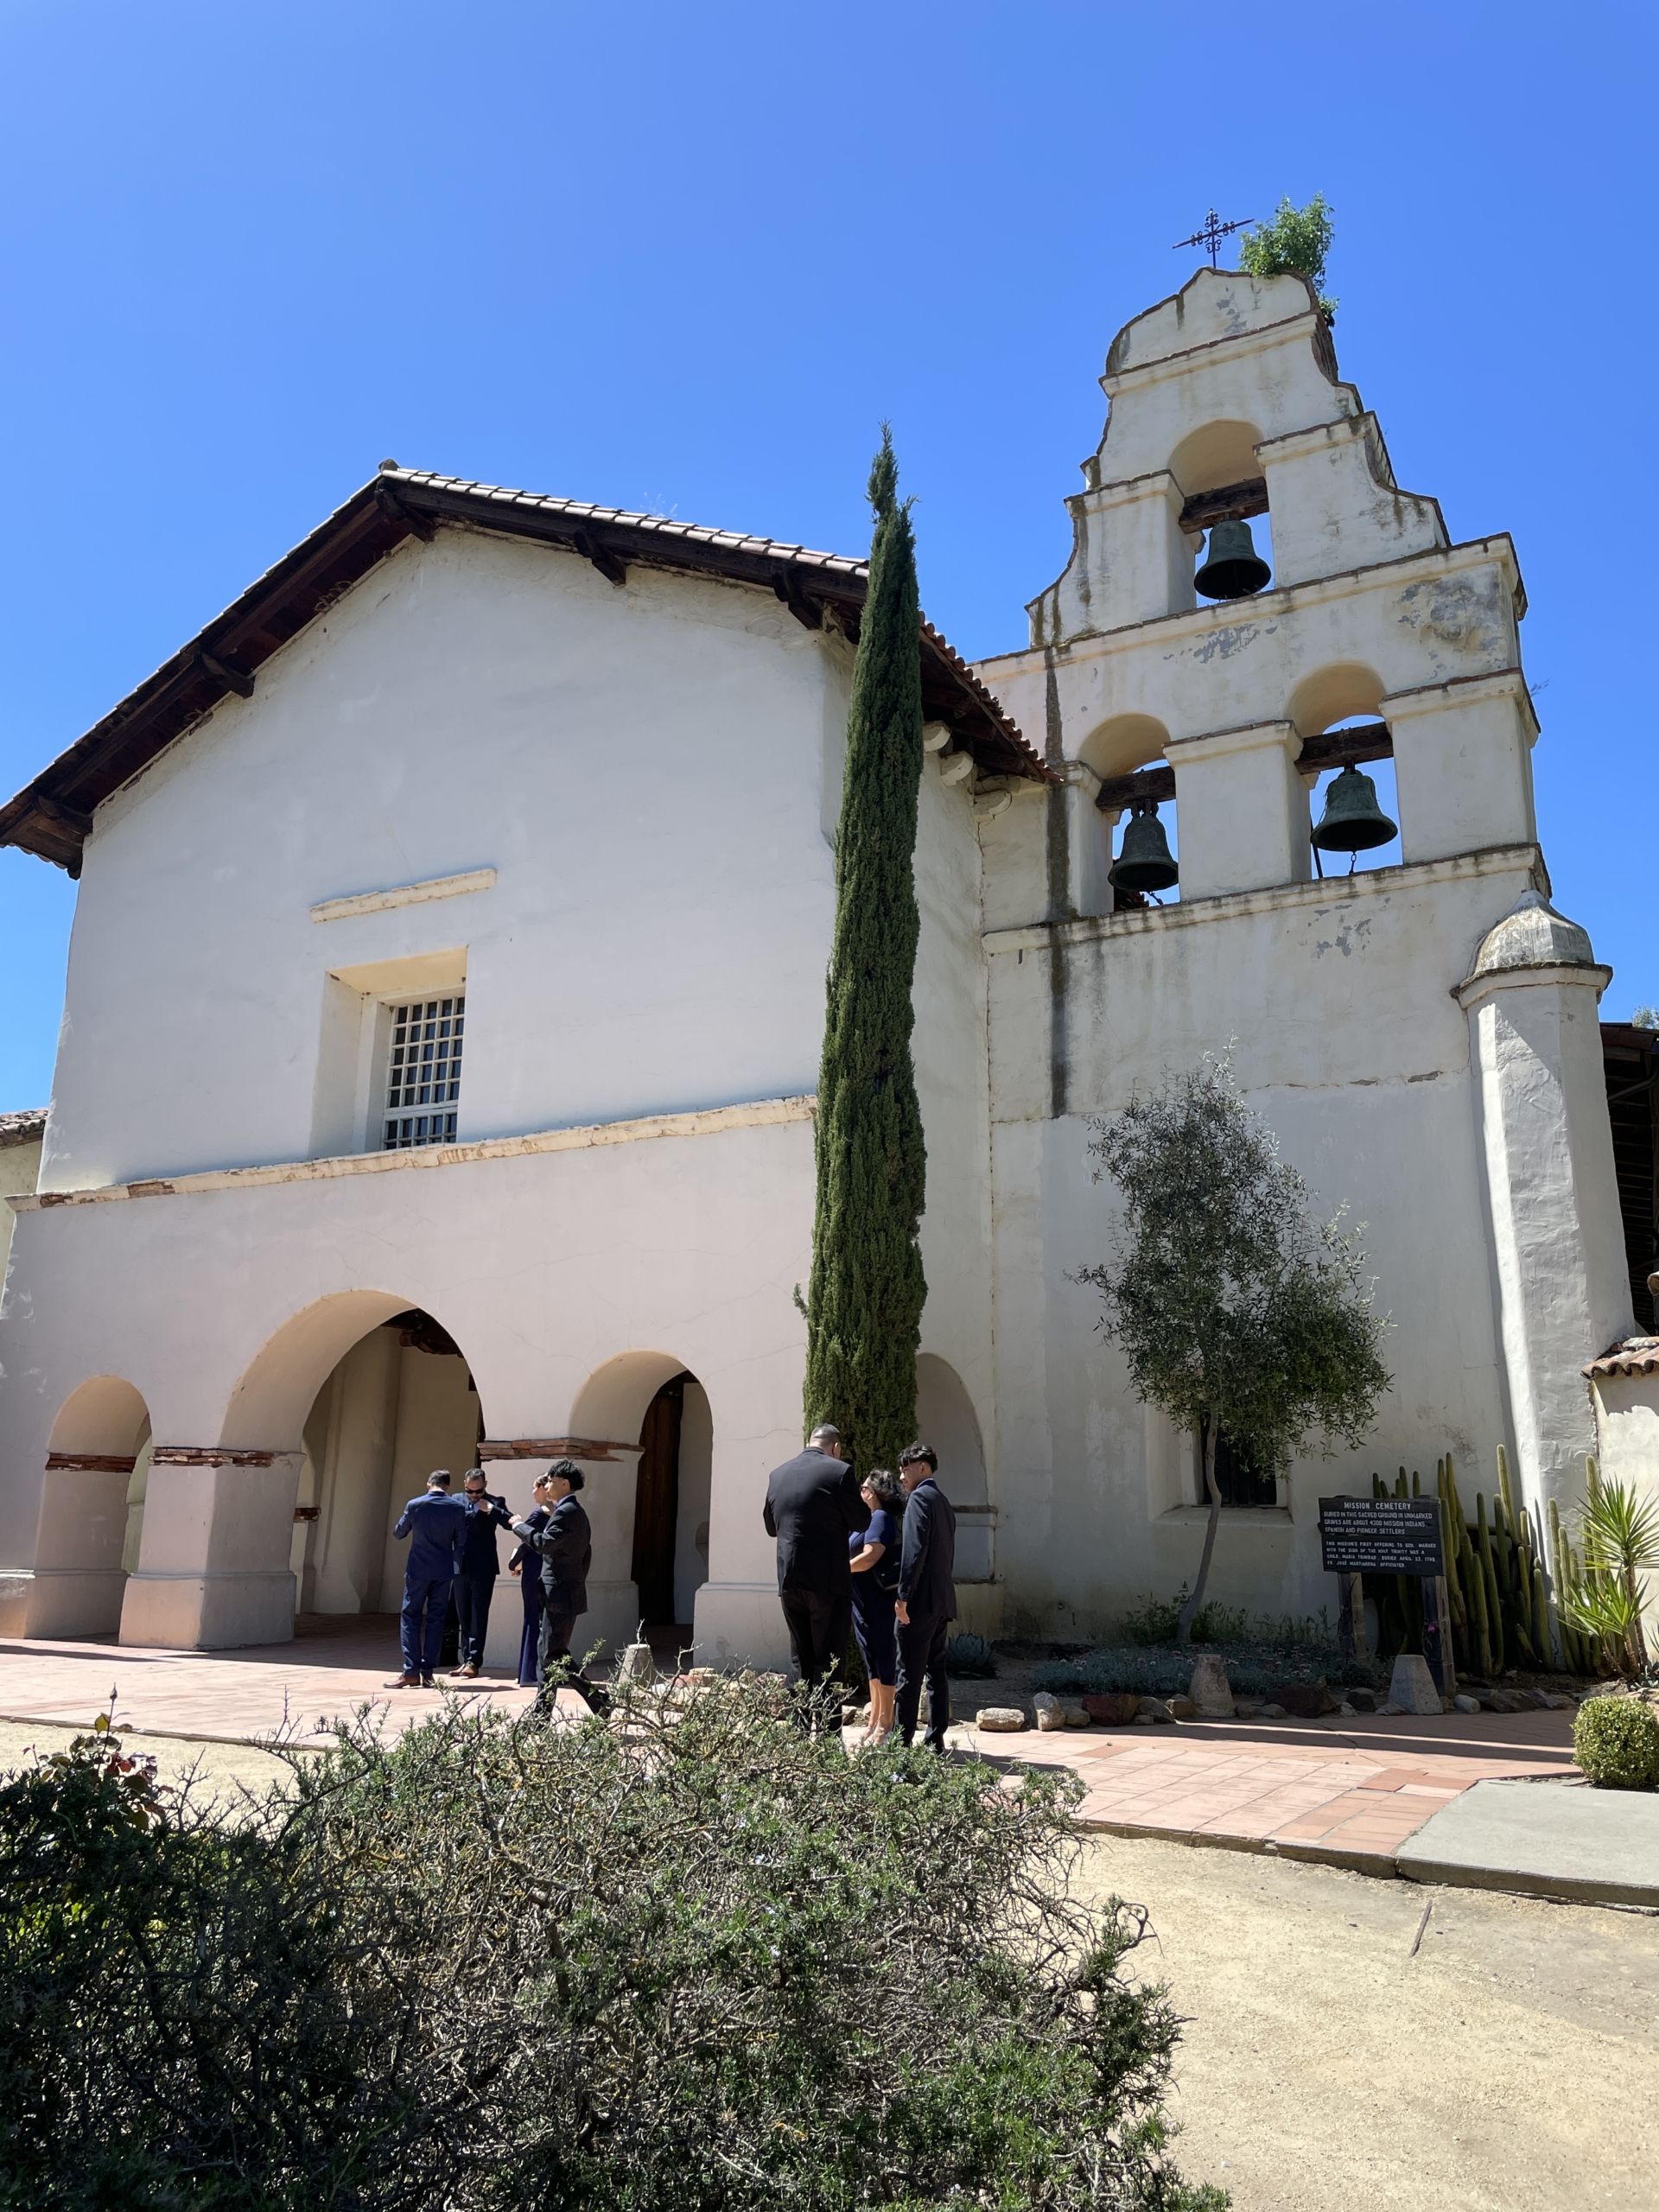 San Juan Bautista Mission. People stand in front of the Mission entryway and Bell Tower.